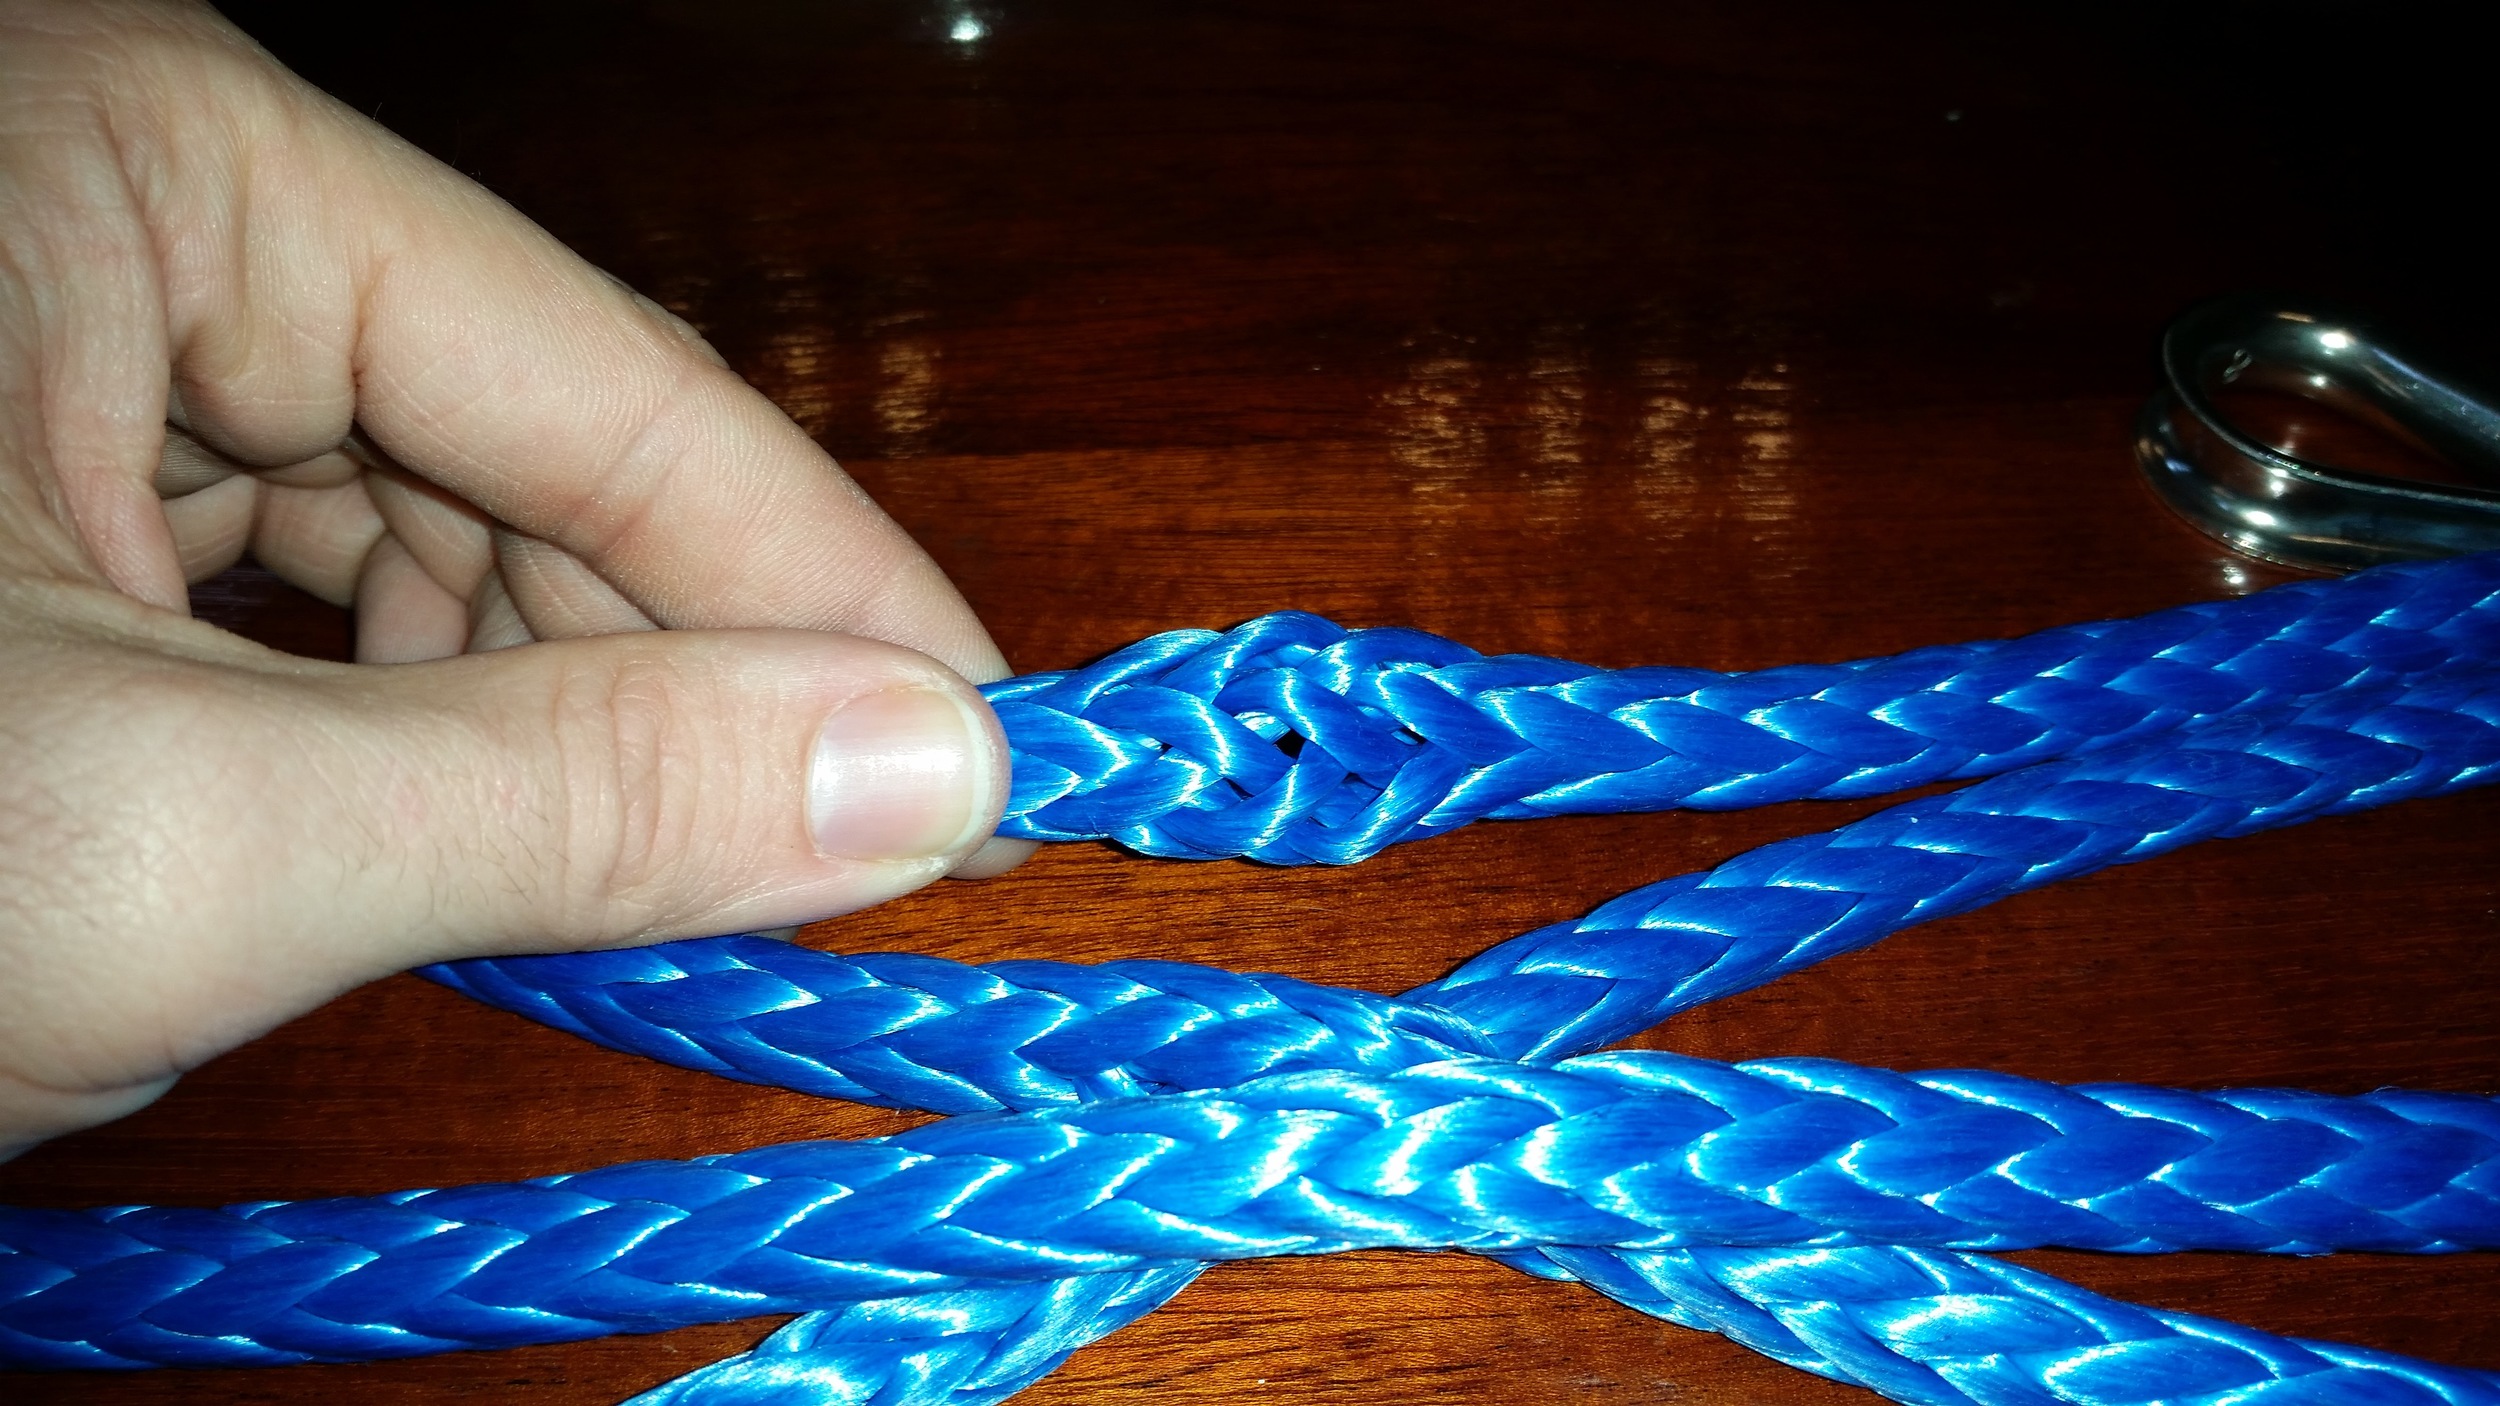 NEW ENGLAND ROPES Stronger than Steel 12-Strand Dyneema